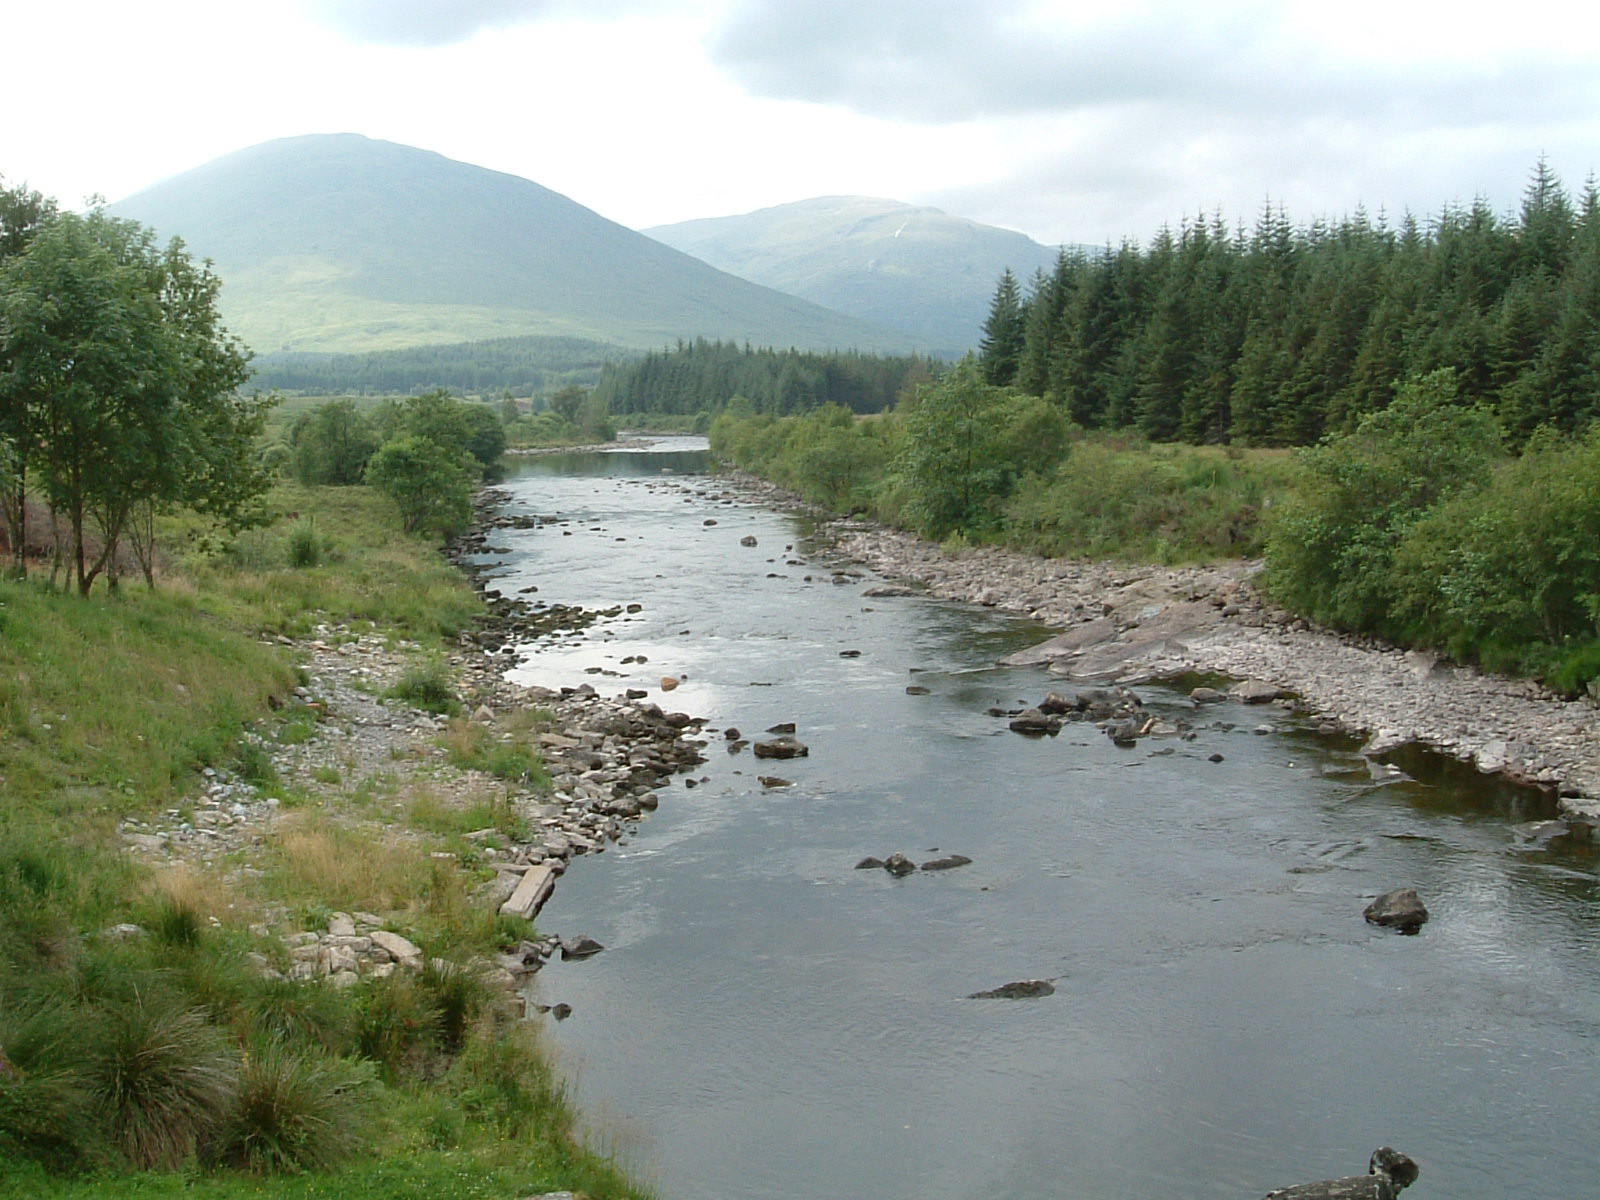 The view along the River Orchy from the bridge at Bridge of Orchy